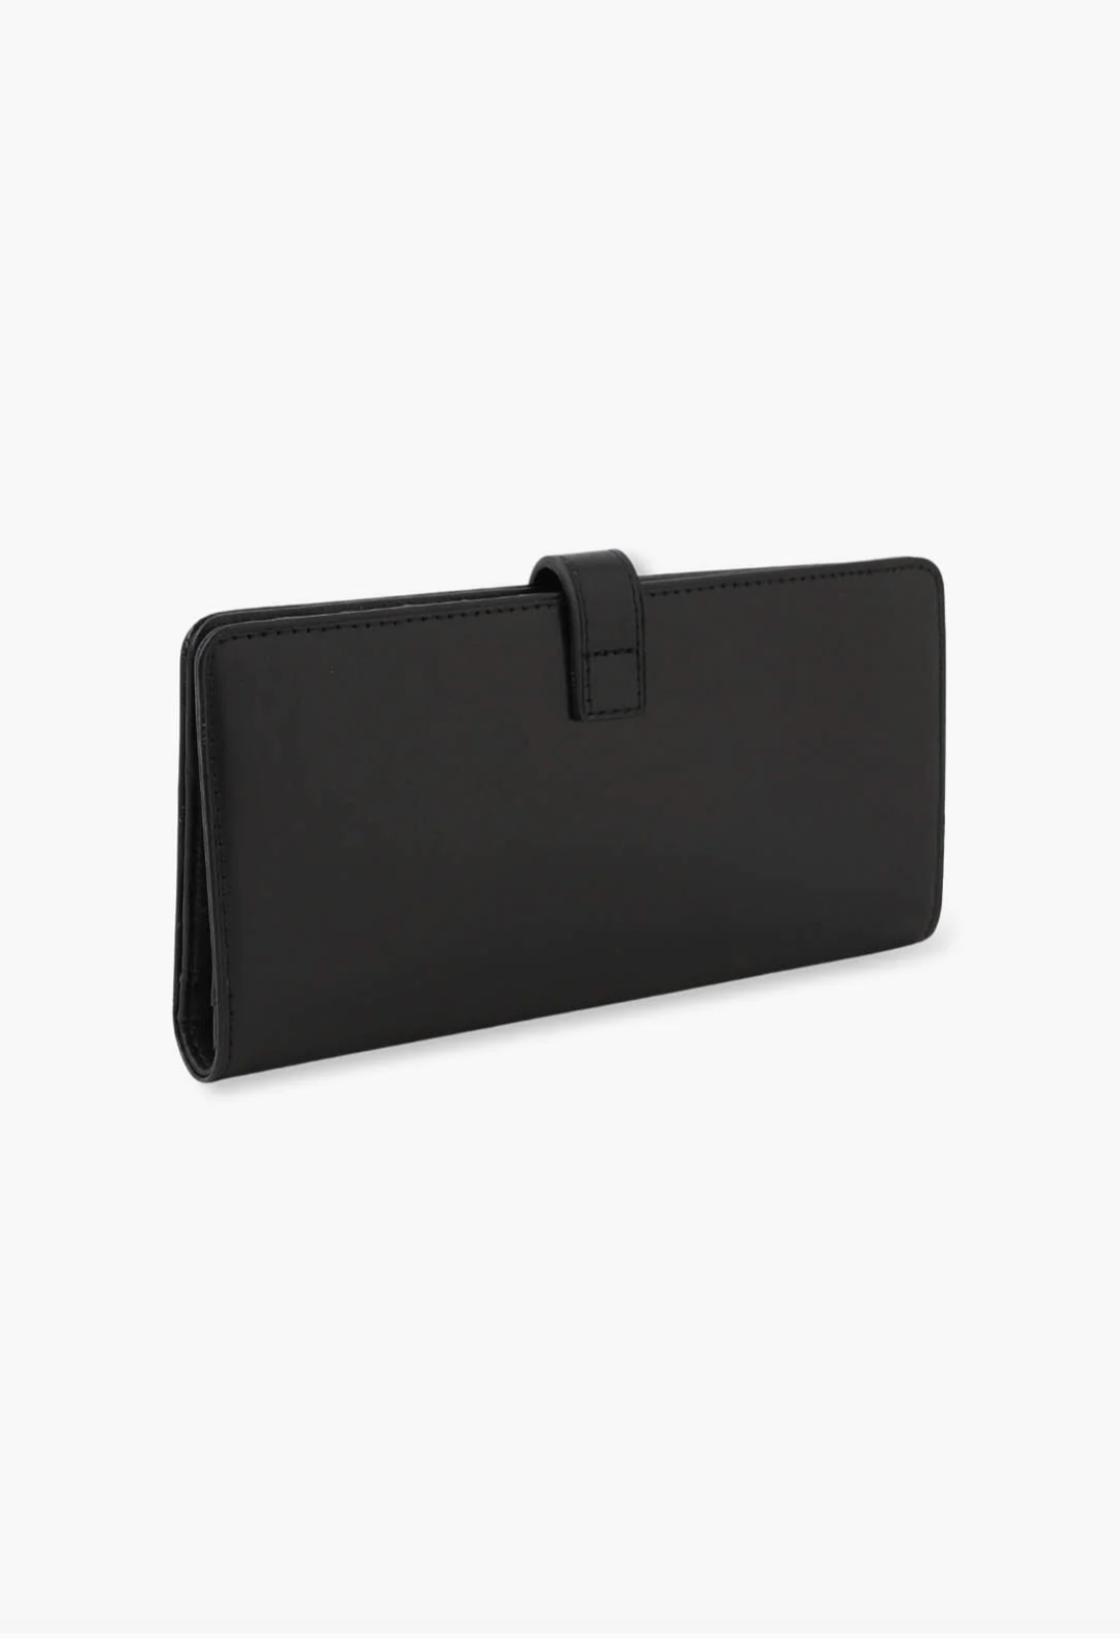 The Roger Wallet black, in a rectangular shape, flap across the top to close it